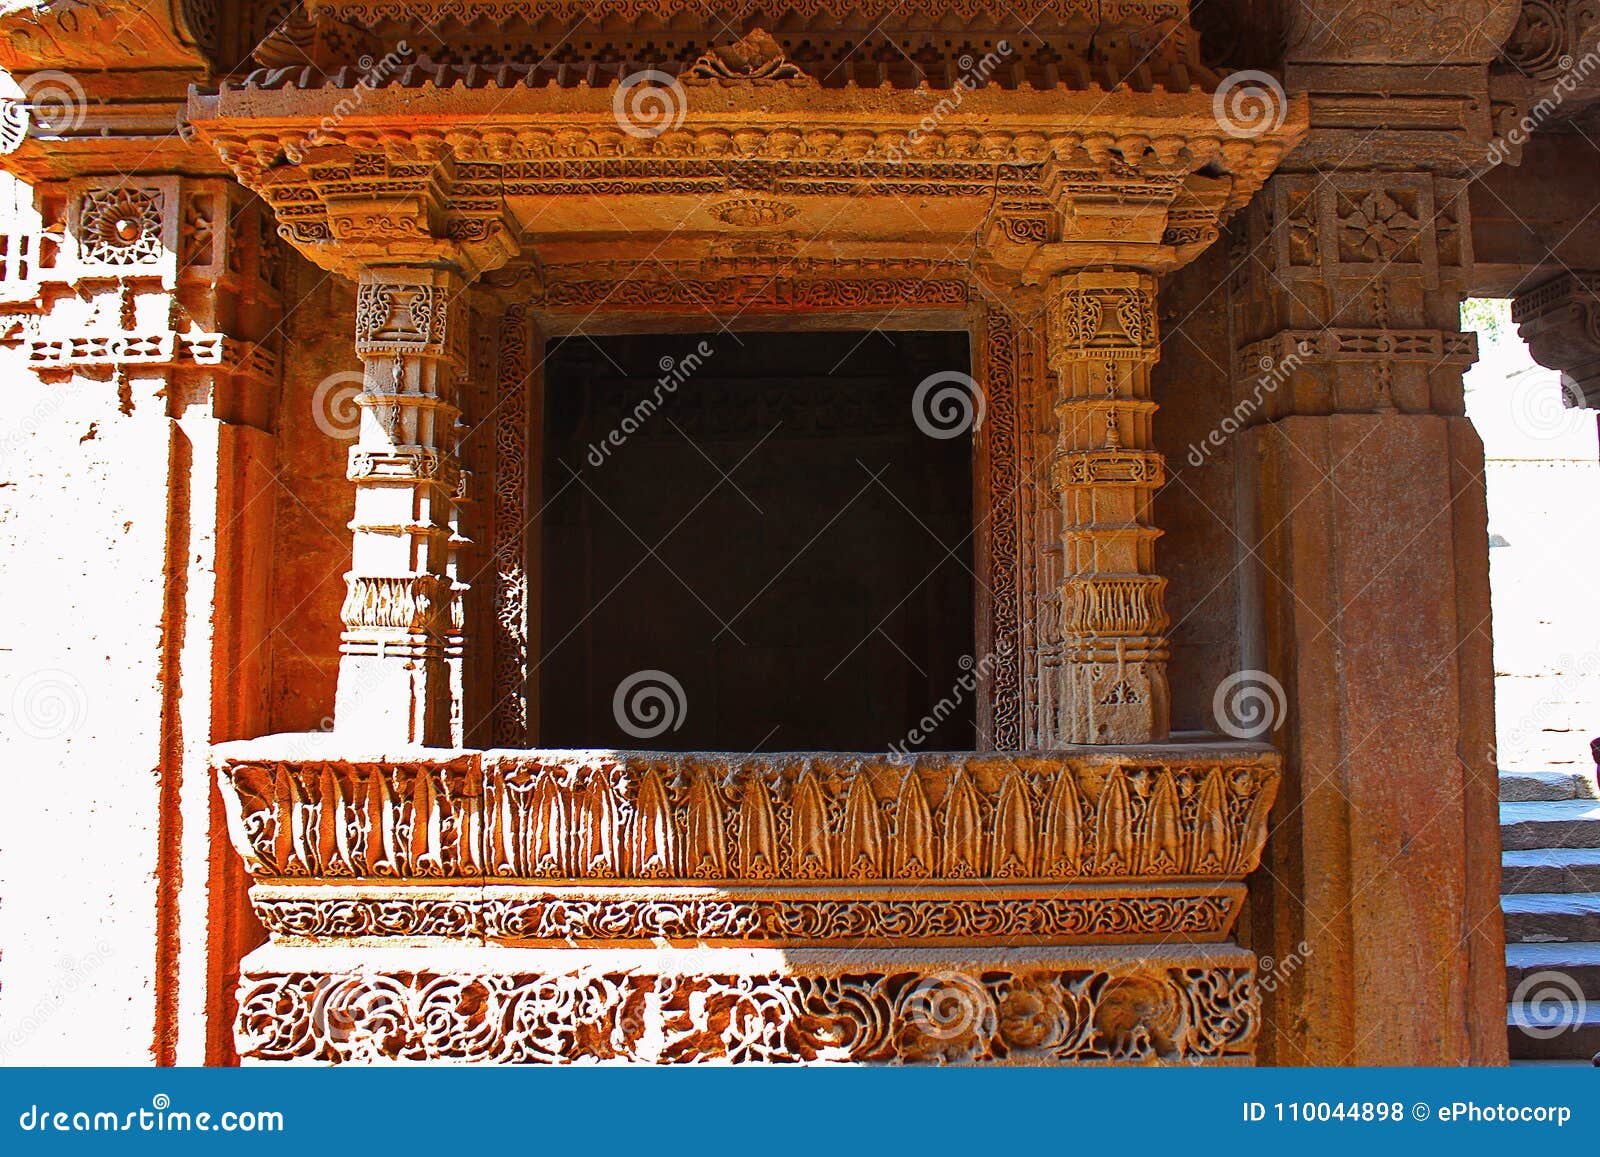 Close Up of a Balcony with Intricate Patterns Engraved on the Borders